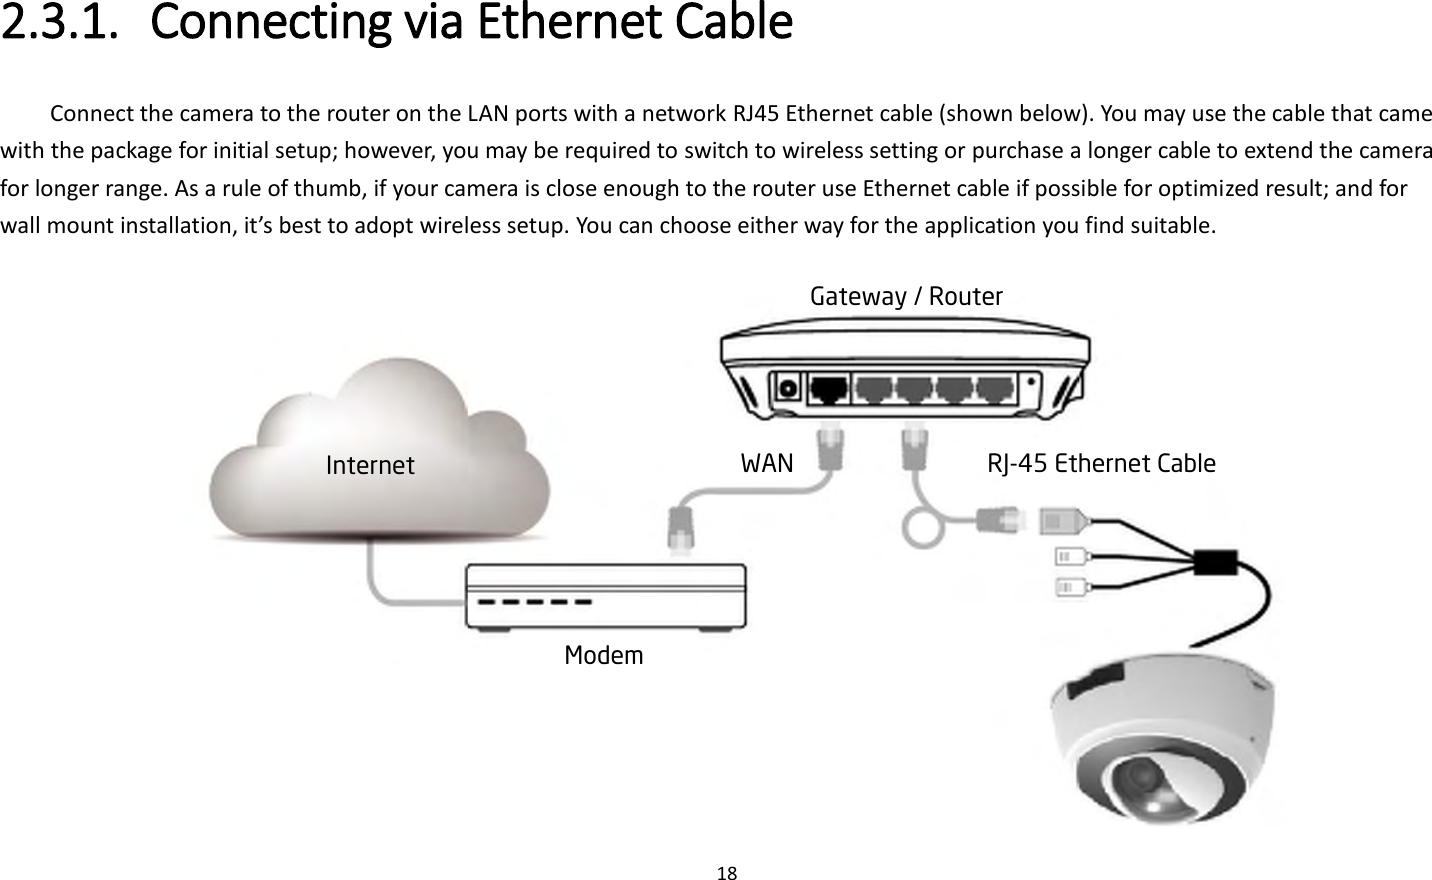 18  2.3.1. Connecting via Ethernet Cable   Connect the camera to the router on the LAN ports with a network RJ45 Ethernet cable (shown below). You may use the cable that came with the package for initial setup; however, you may be required to switch to wireless setting or purchase a longer cable to extend the camera for longer range. As a rule of thumb, if your camera is close enough to the router use Ethernet cable if possible for optimized result; and for wall mount installation, it’s best to adopt wireless setup. You can choose either way for the application you find suitable.   Gateway / Router  Internet Modem WAN RJ-45 Ethernet Cable 